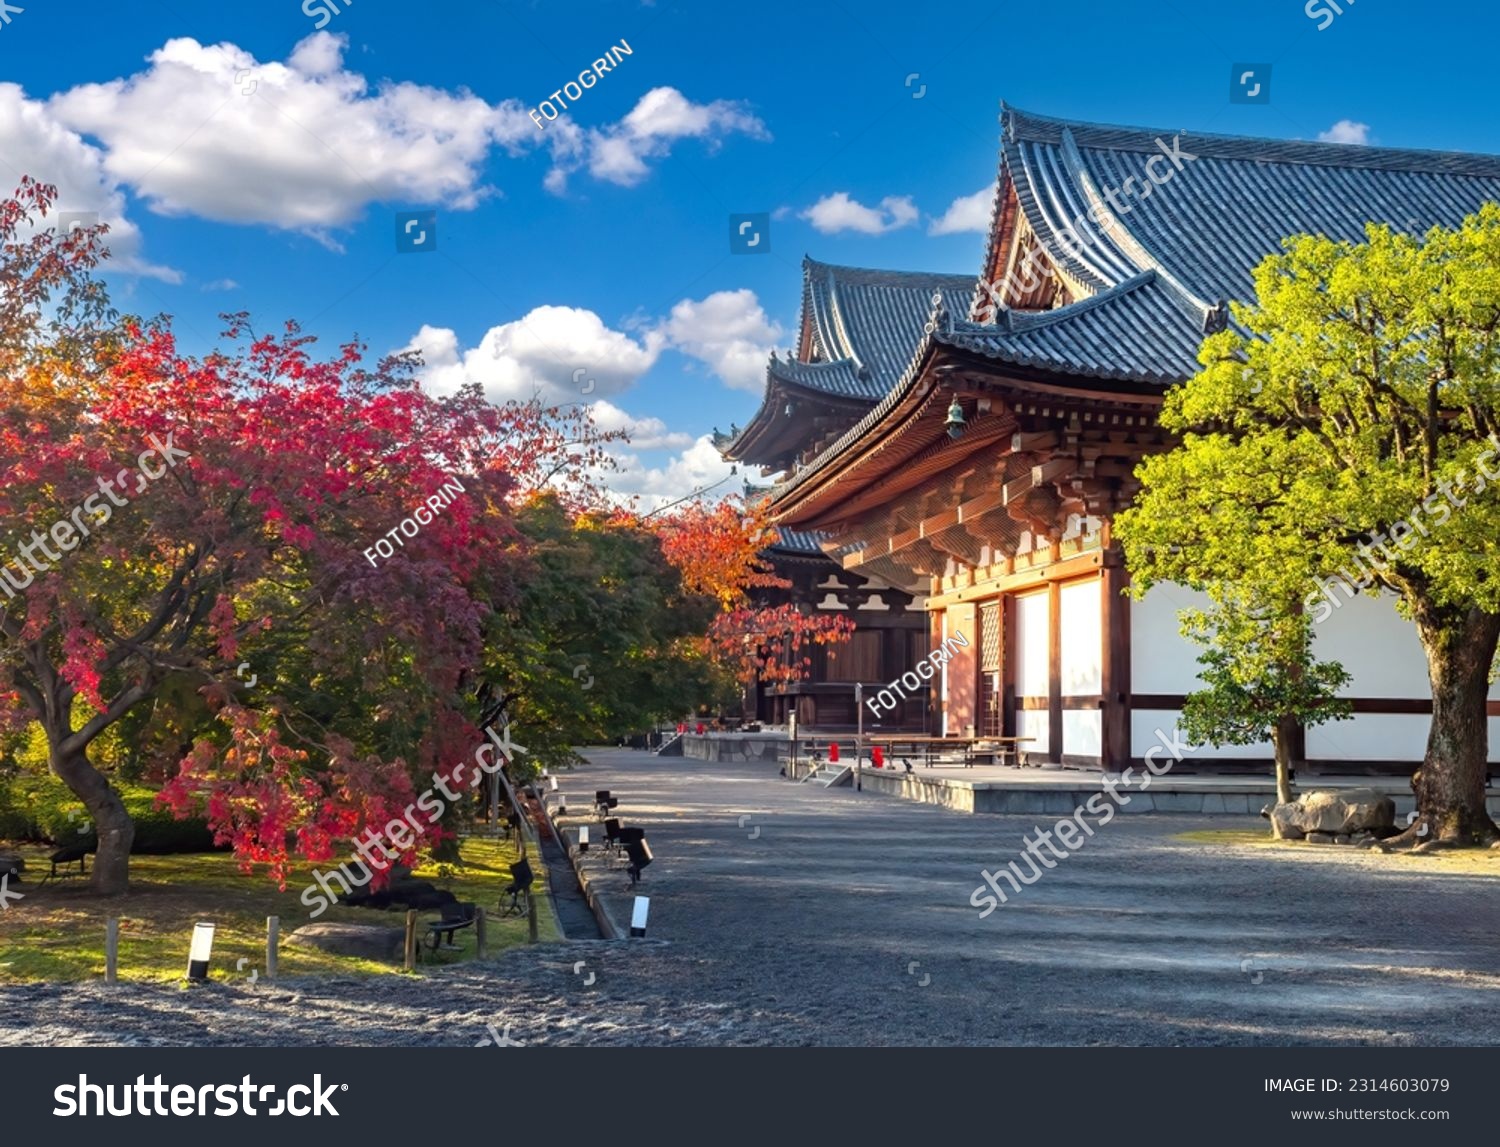 Landmarks Japan. Architecture of kyoto. Ancient buildings in buddhist style. Japanese temples with blue sky. National landmarks of Japan. Kyoto in sunny weather. Excursions in kyoto. Travel in Japan #2314603079